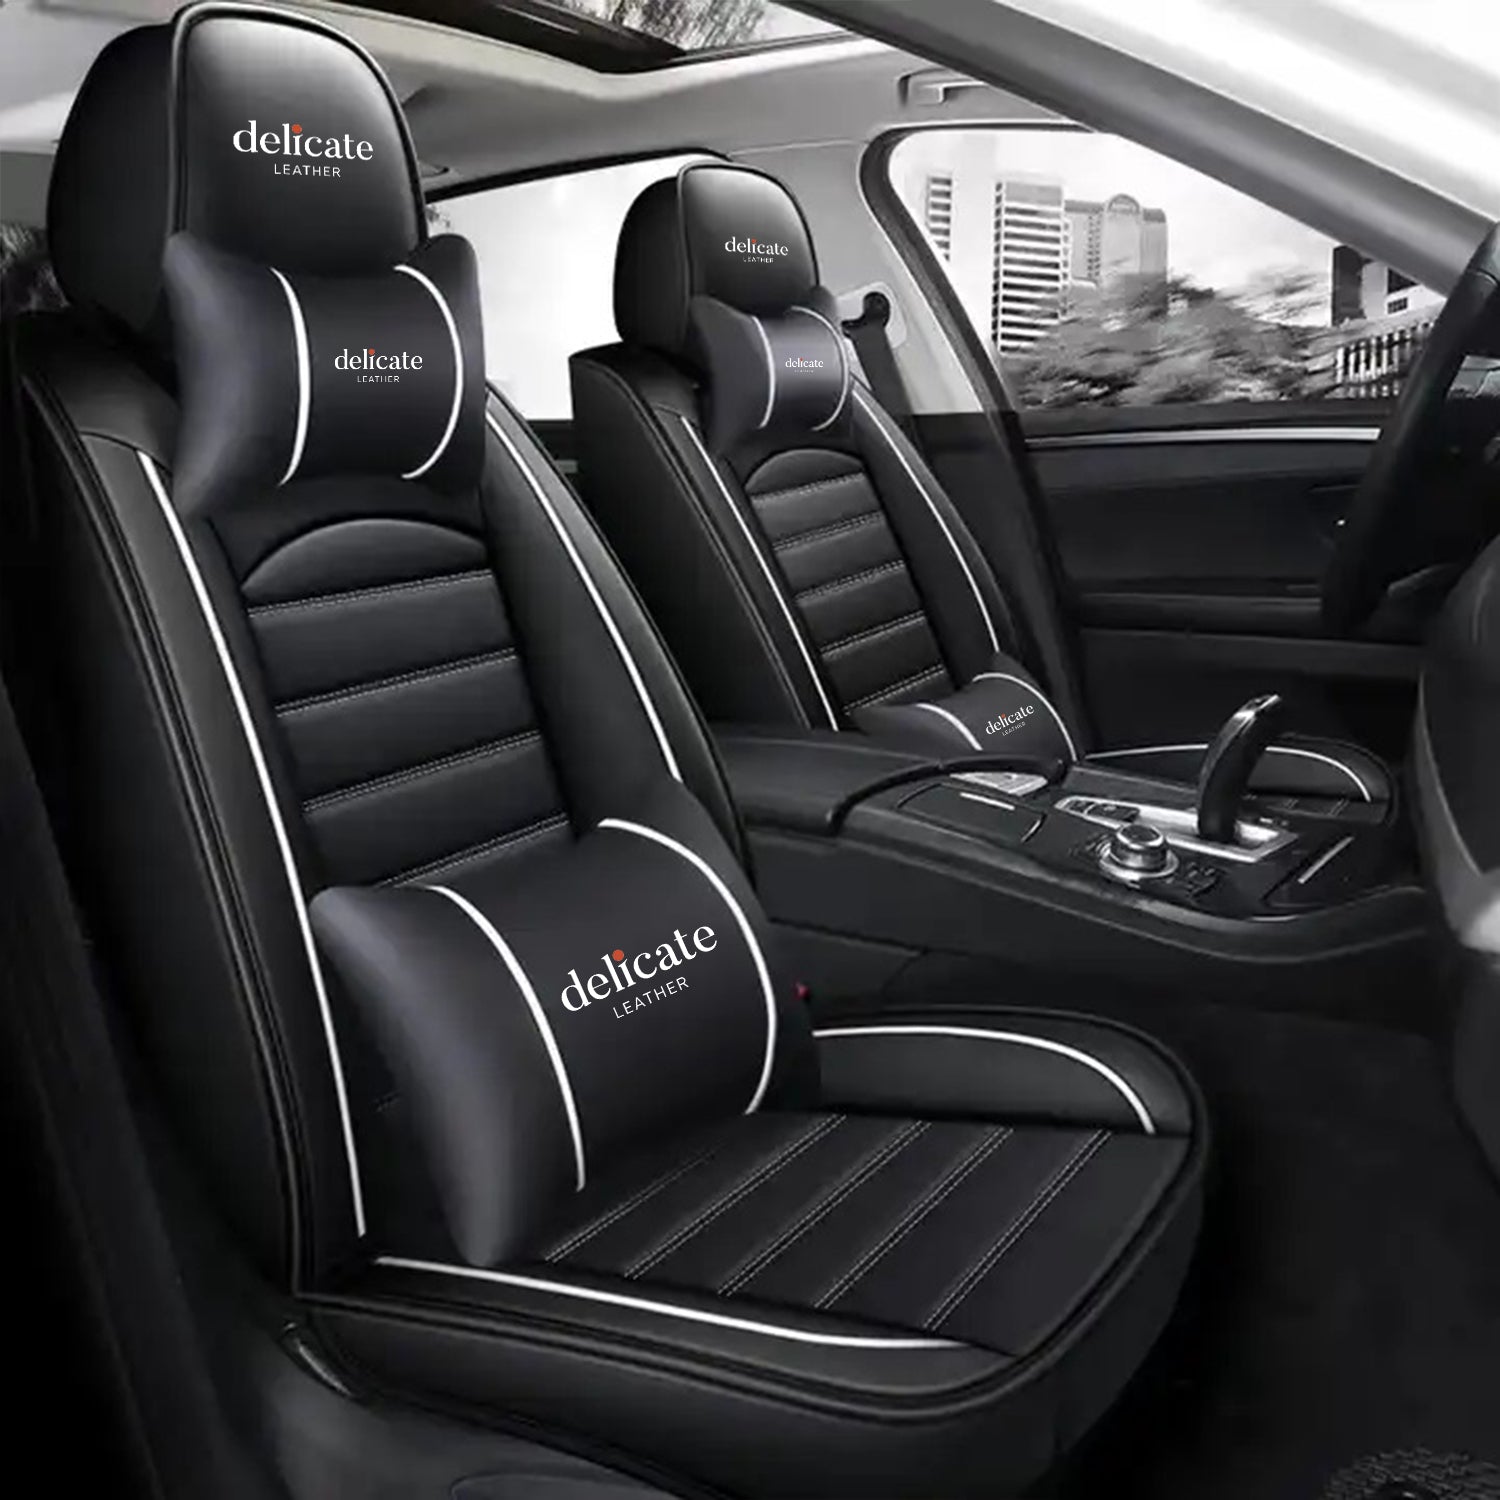 Delicate Leather Car Seat Cover Luxury Leather Car Seat Cover Custom Universal 5pcs Car Seat Cover Set Leather Full Set Universal - Delicate Leather